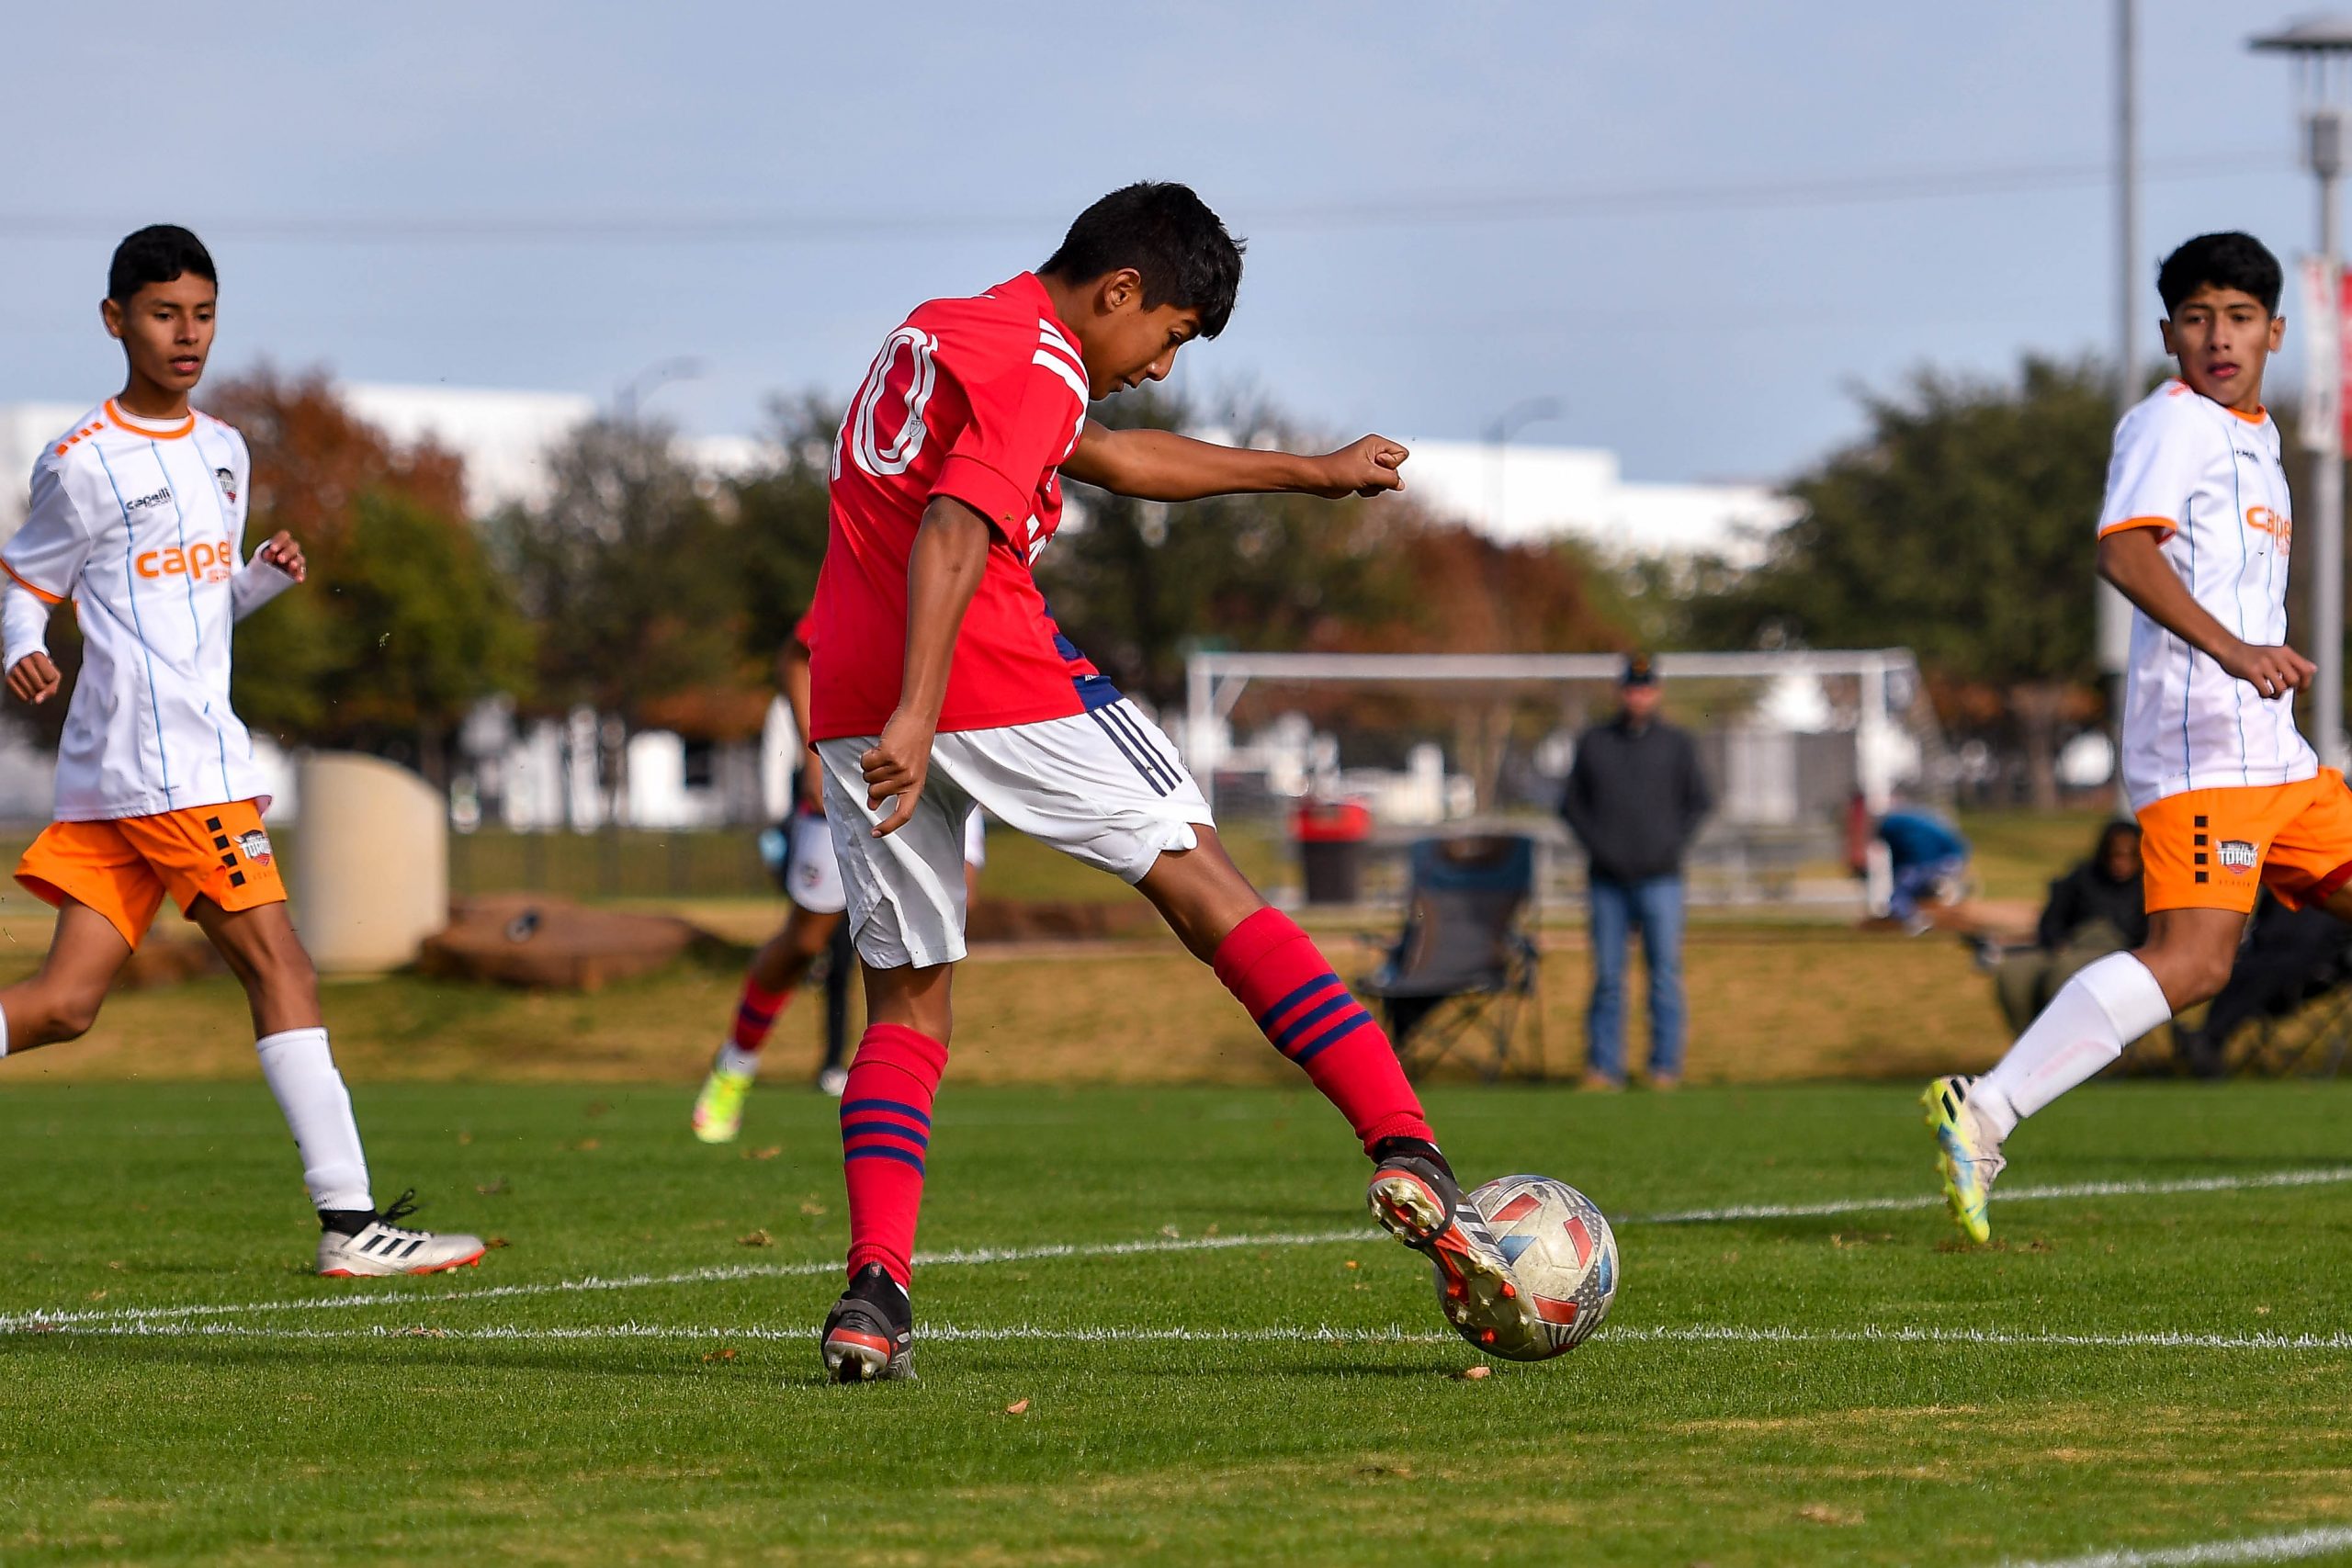 FC Dallas U15 midfielder (10) shoots in the MLS Next matchup against RGV FC.